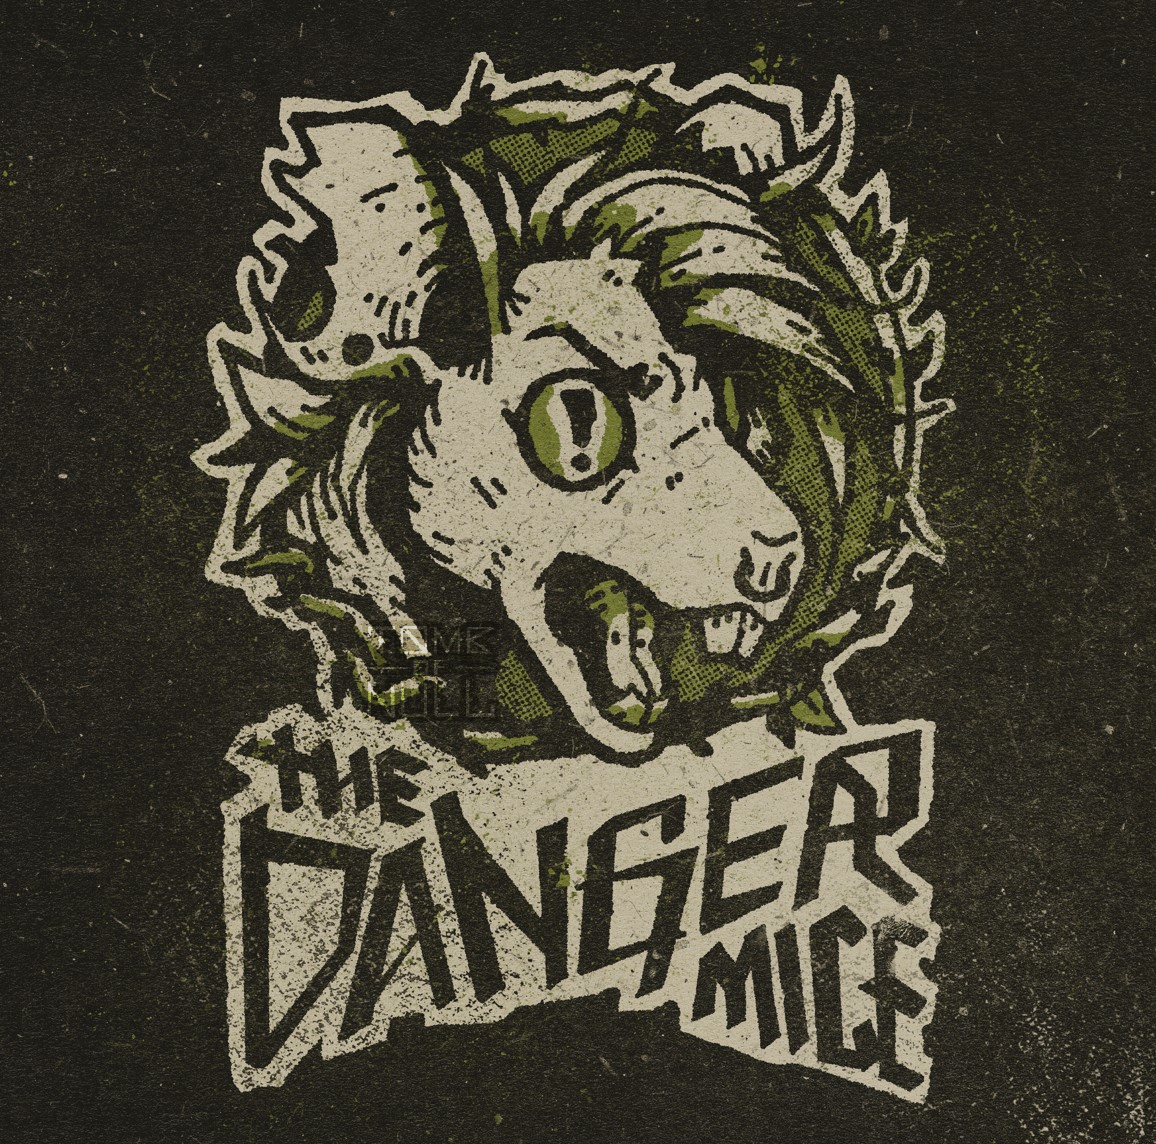 Illustration of a logo consisting of a mouse’s head framed in t wreath of vines. The mouse is angry and sports a floppy punk-cut and piercings. Their ear has a chunk bitten out of it and an exclamation mark in place of a pupil. Beneath is stylistic text reading,”The Danger Mice”.